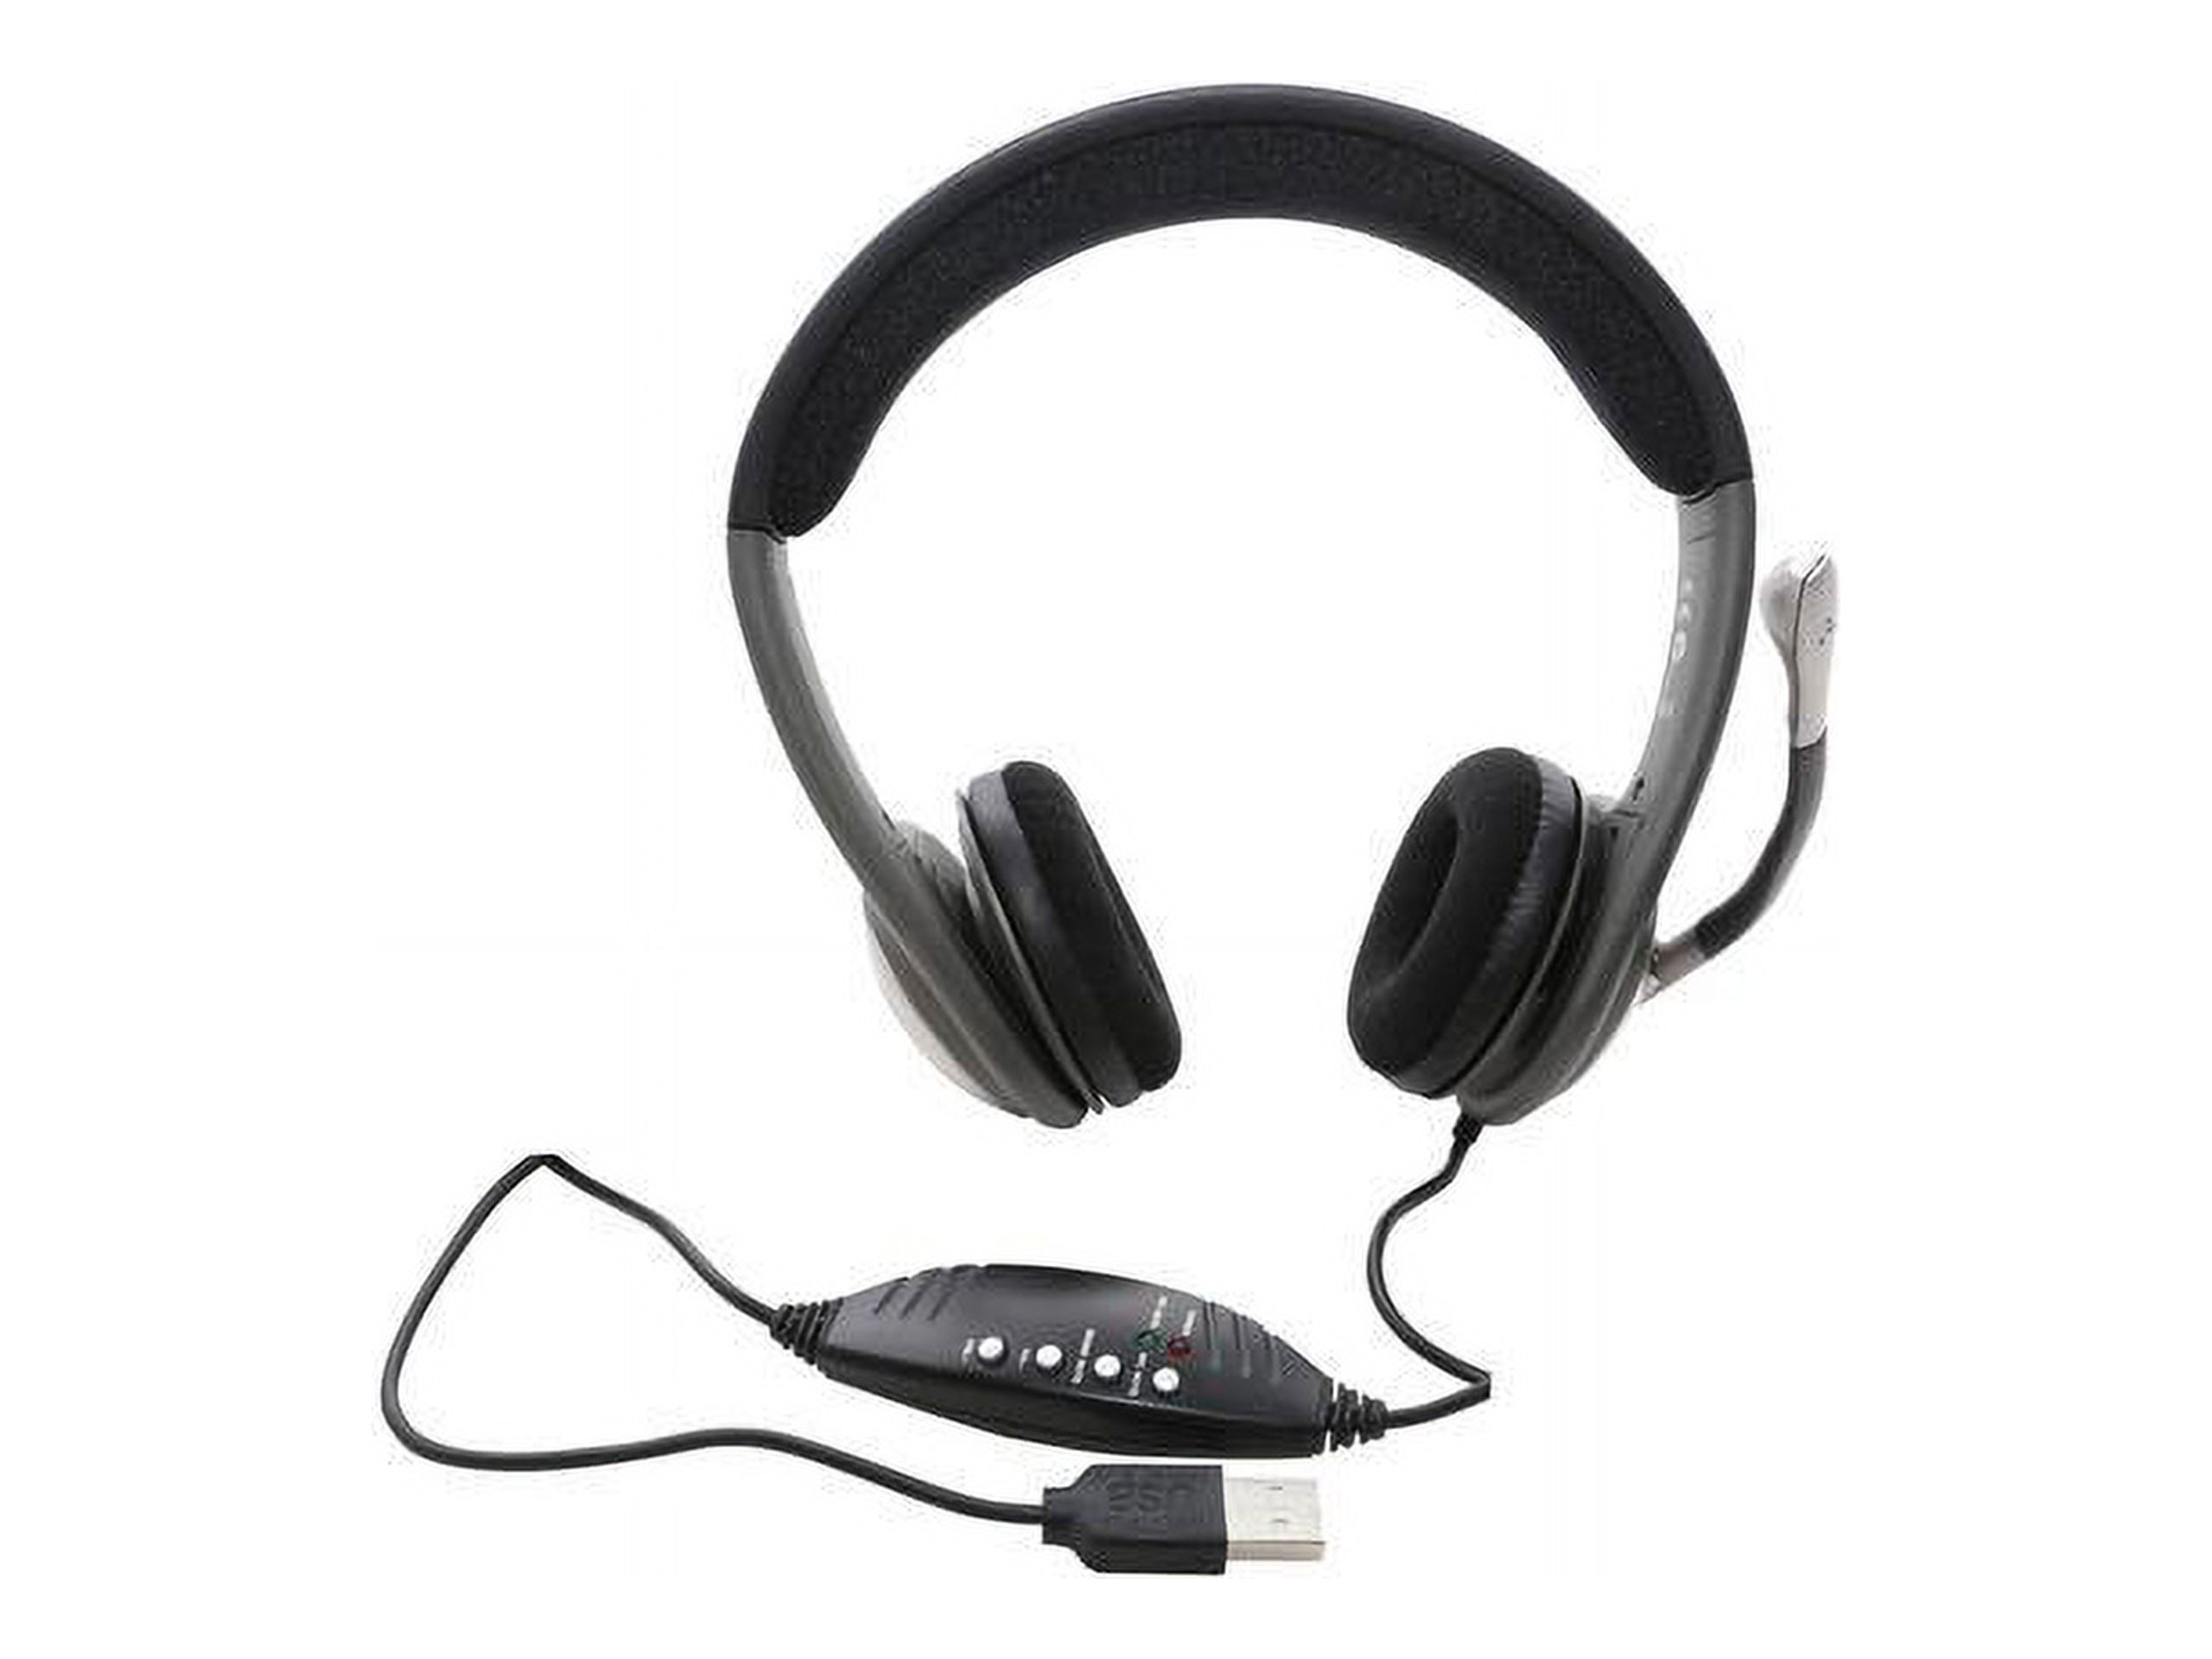 SYBA Multimedia Connectland Headset - Stereo - USB, Mini-phone (3.5mm) - Wired - 32 Ohm - 20 Hz - 20 kHz - Over-the-head - Binaural - Ear-cup - image 2 of 5